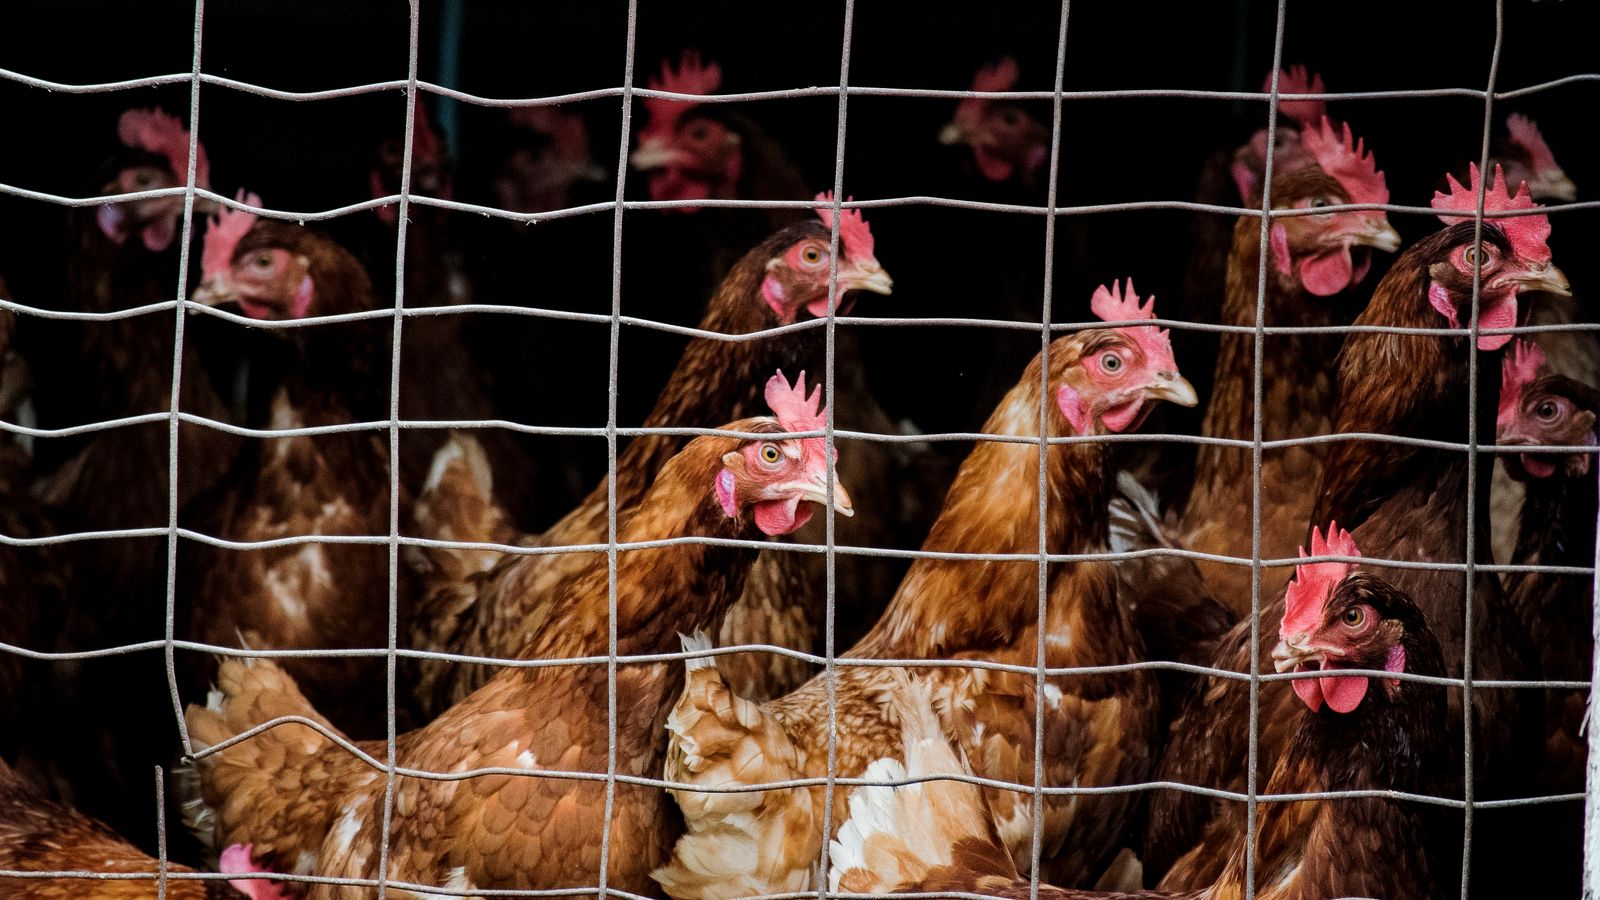 Scotland could be first in UK to ban egg companies from keeping chickens in cages